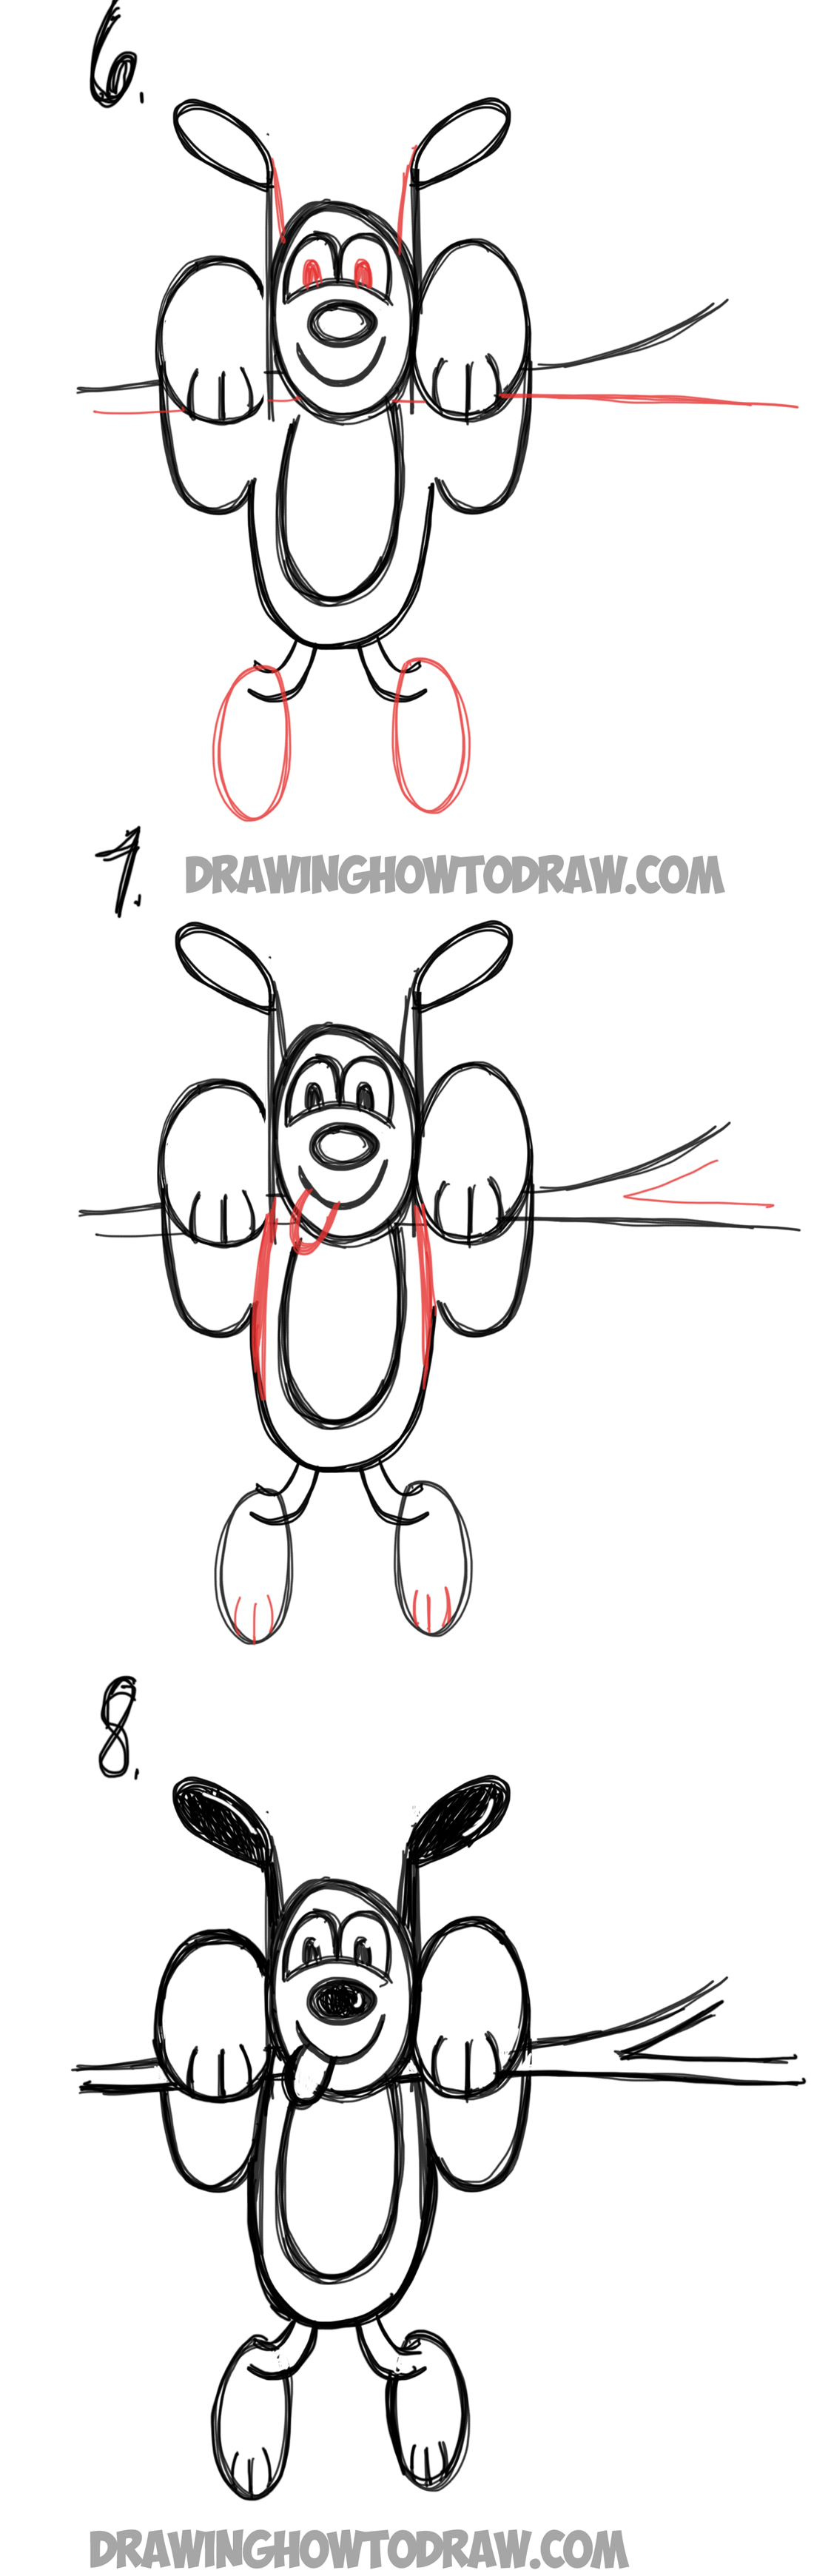 How To Draw A Cartoon Dog Hanging Out From The Word Dog Easy